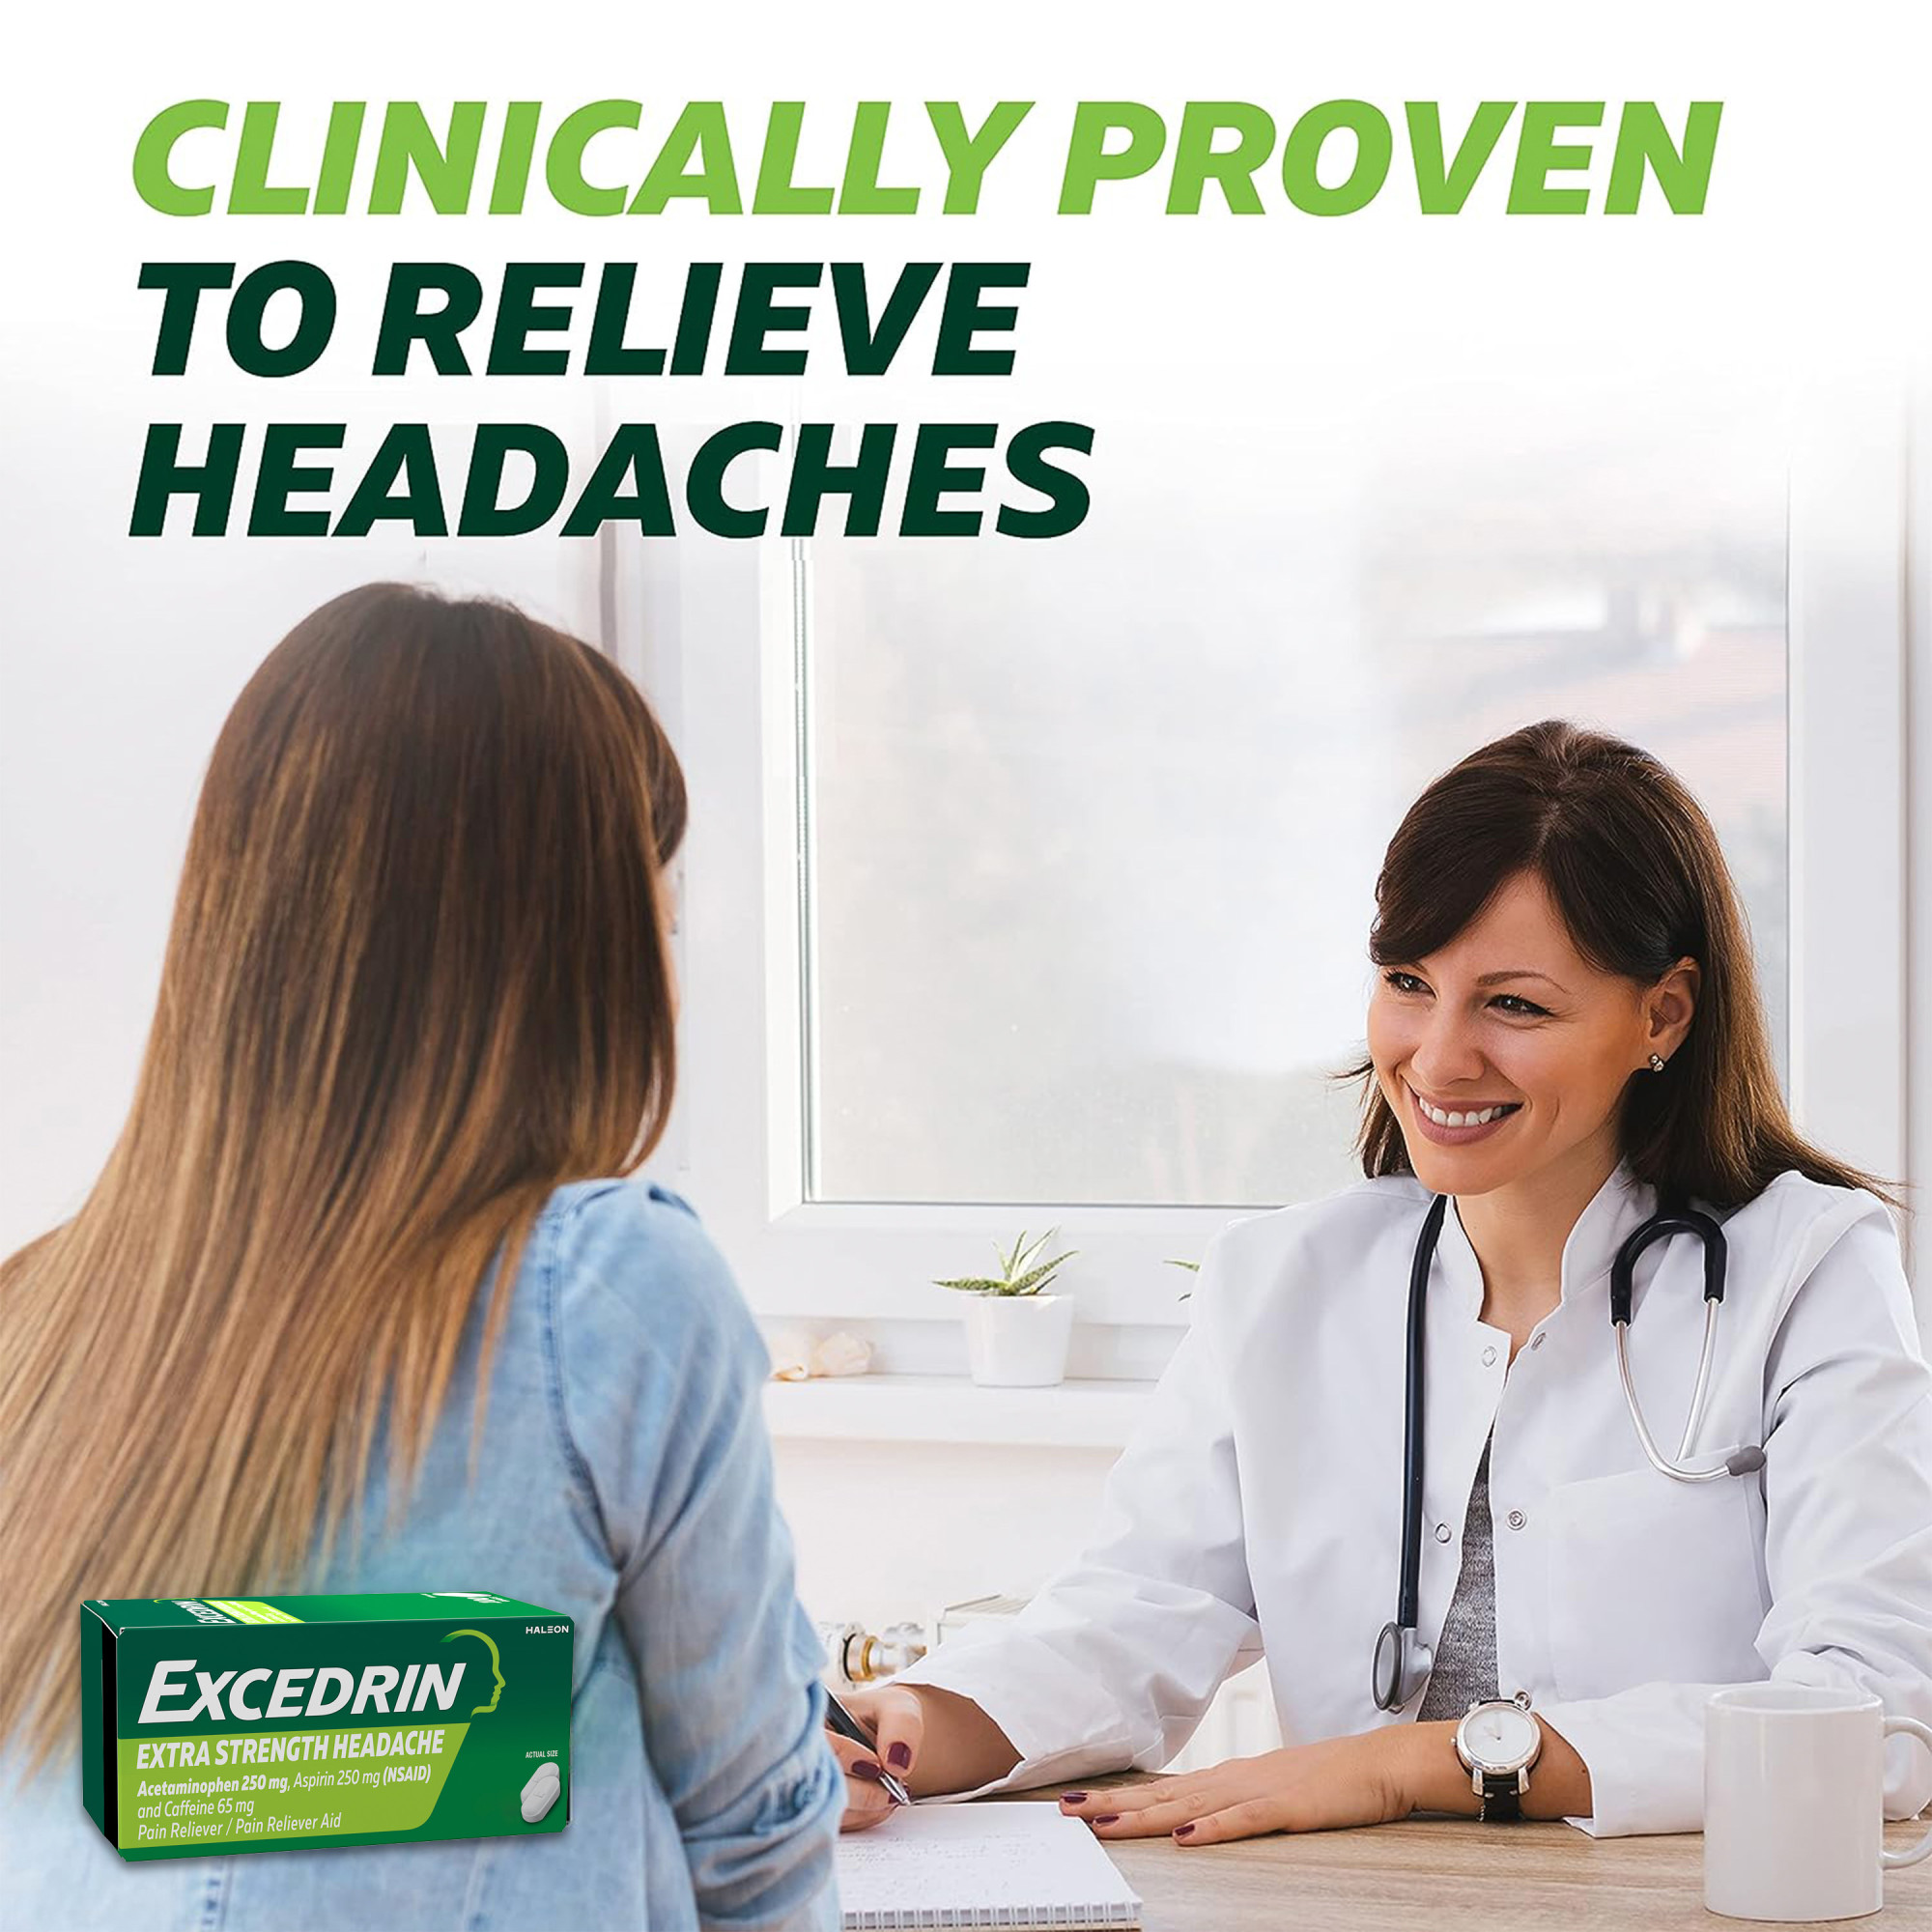 Excedrin Extra Strength Acetminophen and Aspirin Headache Medicine Caplets, 50 Count - image 5 of 7